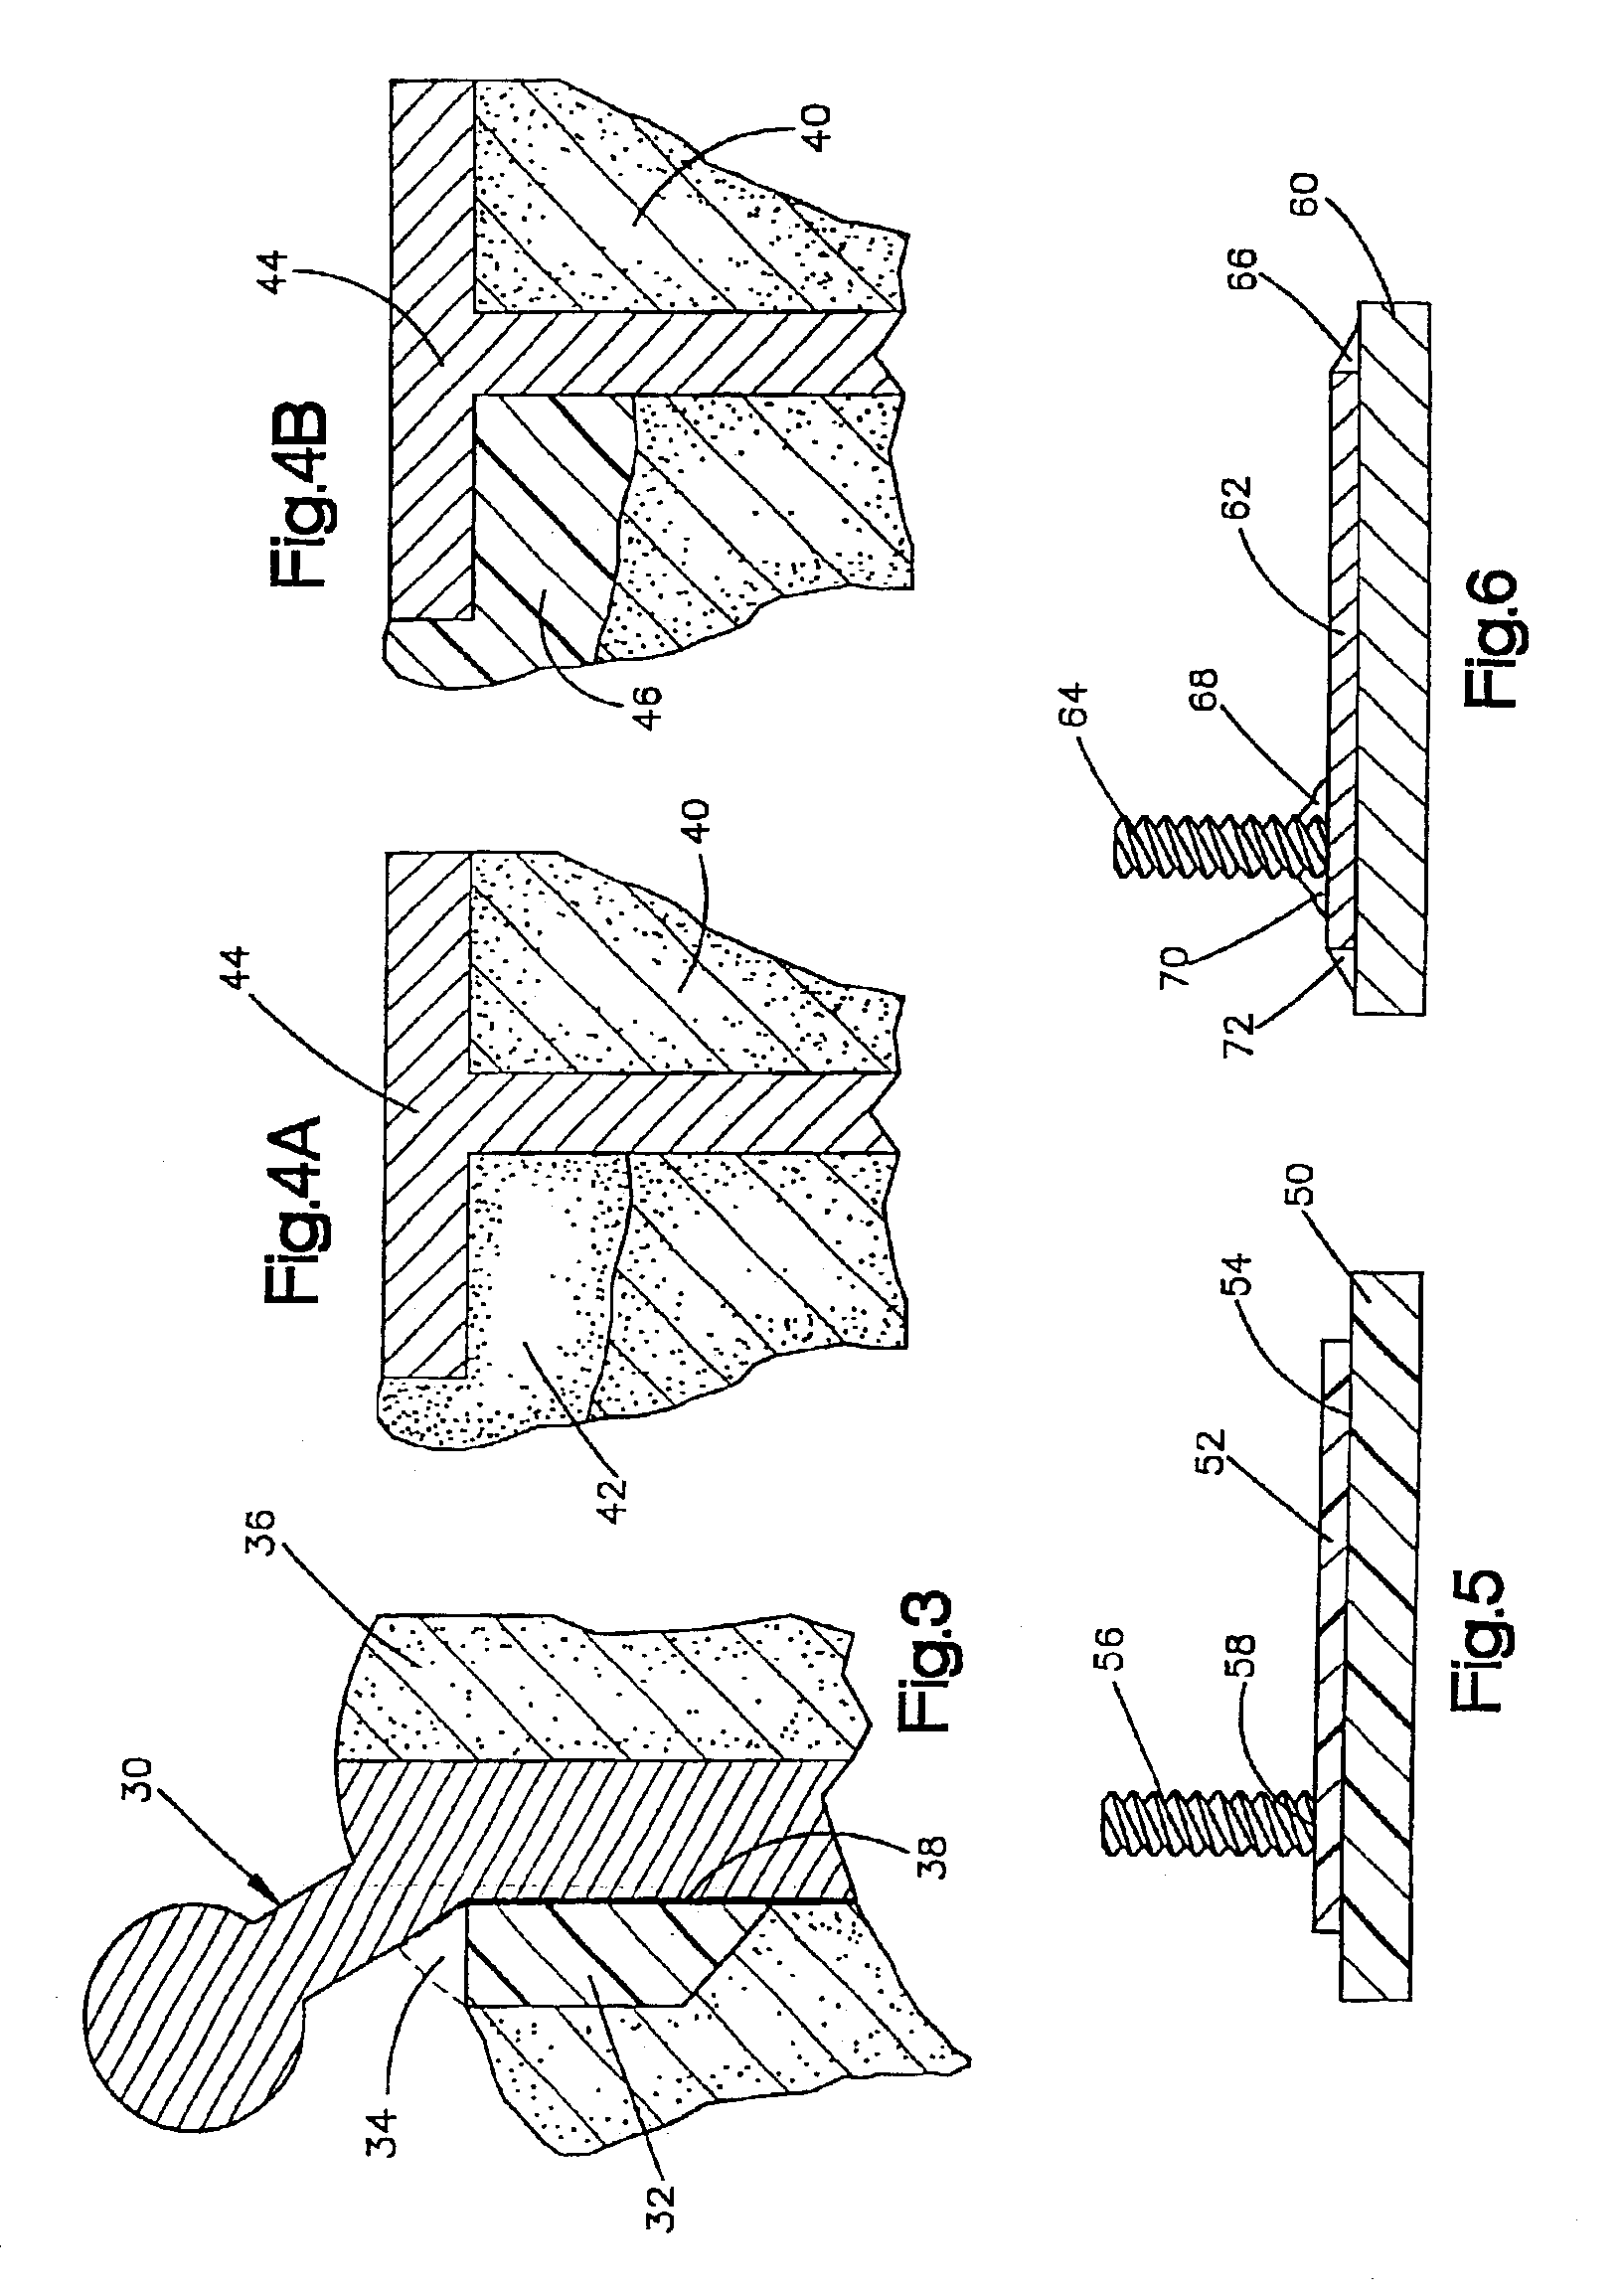 Surgical devices having a biodegradable material with a therapeutic agent